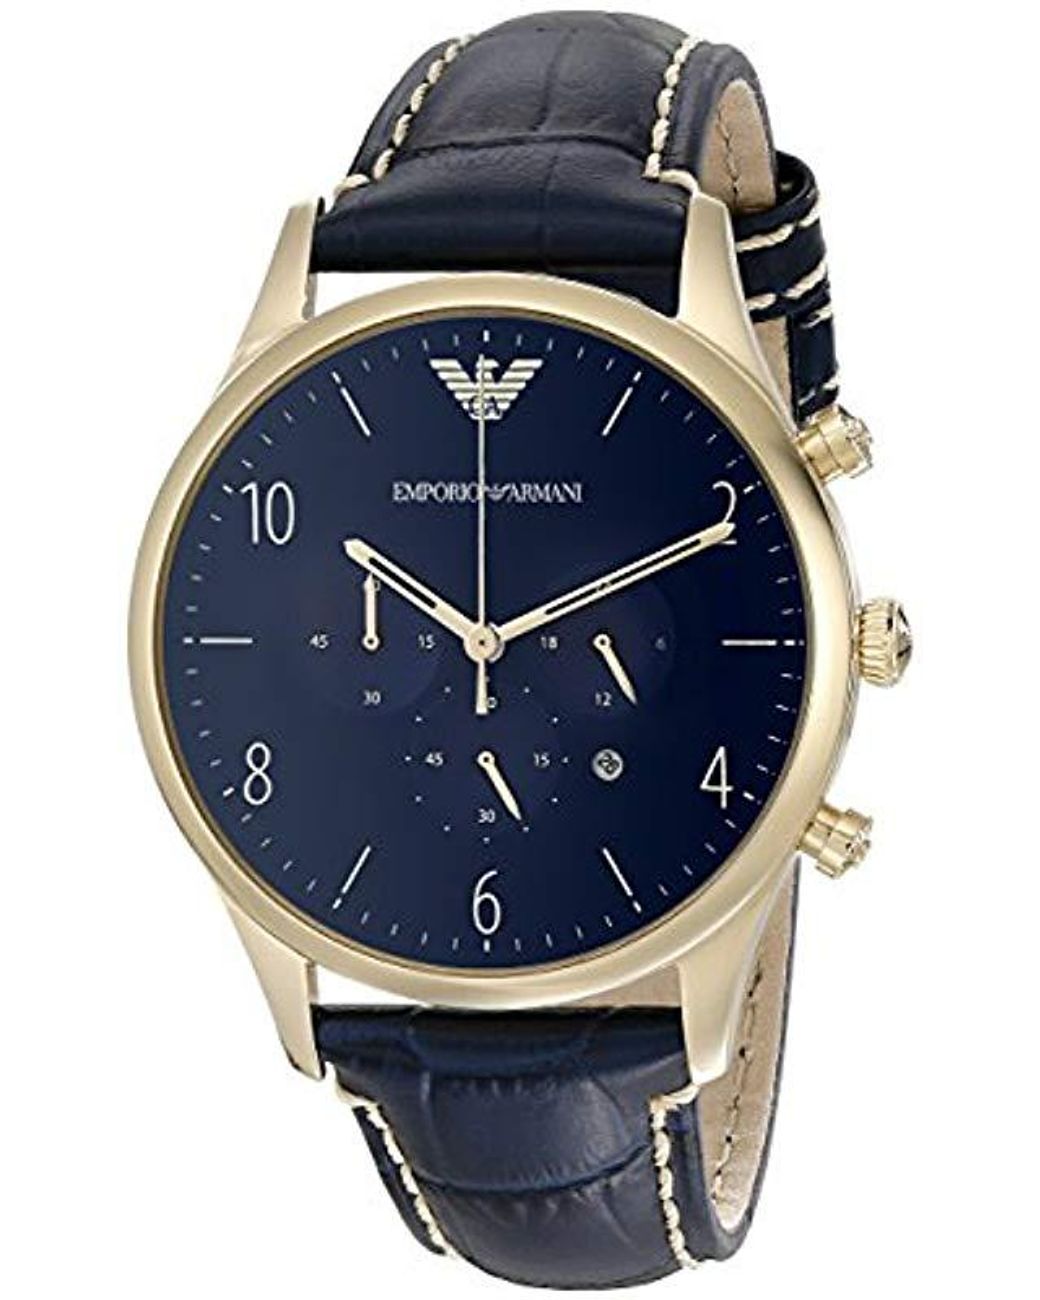 Emporio Armani Ar1862 Sport Blue Leather Watch in Blue for Men - Save ...